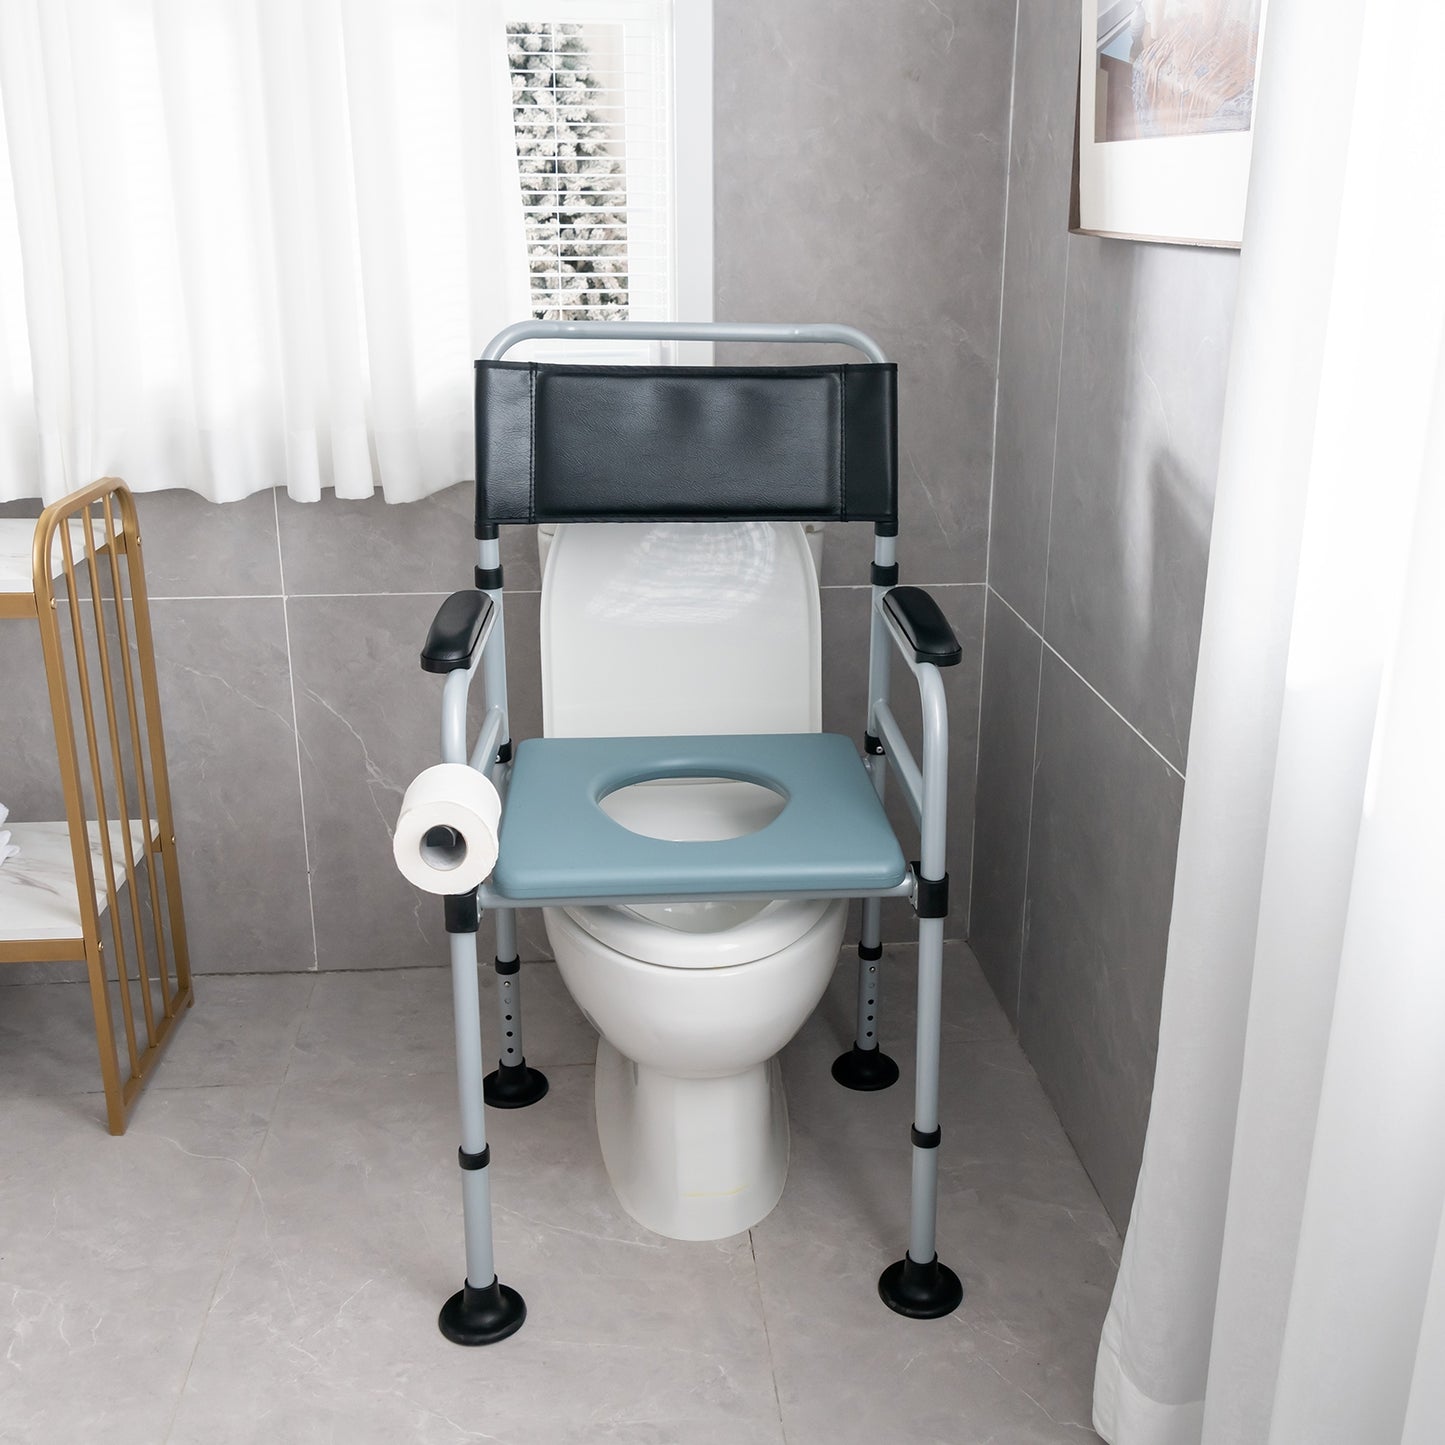 4-in-1 Folding Bedside Commode Chair with Detachable Bucket and Towel Holder